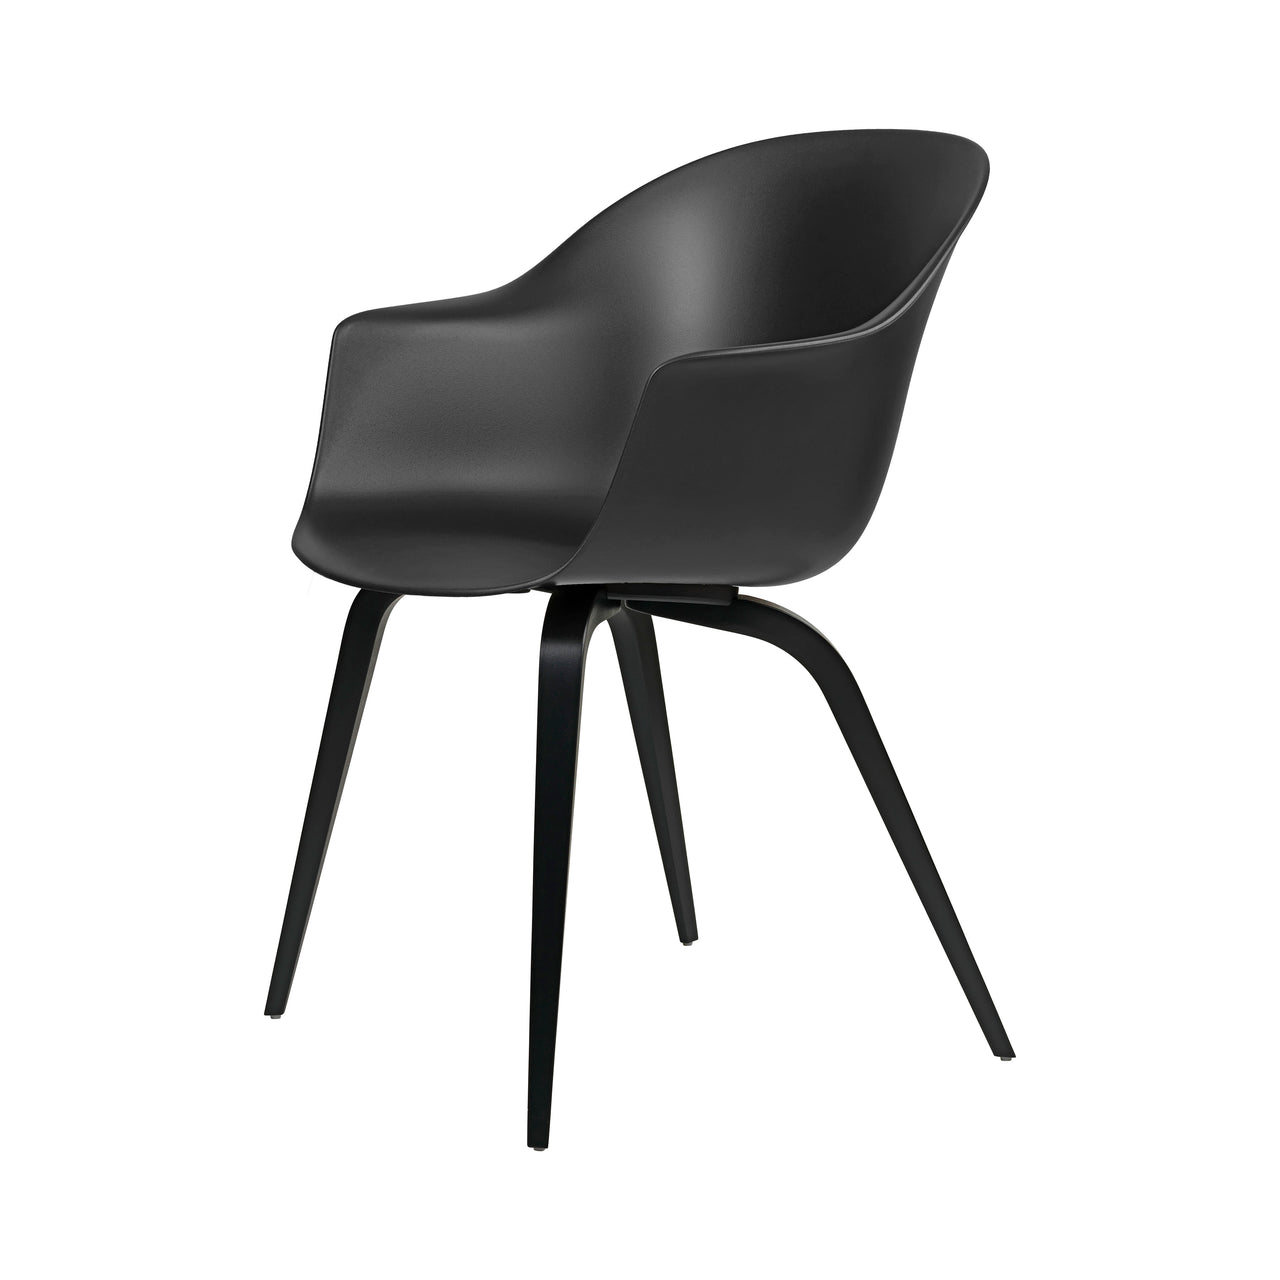 Bat Dining Chair: Wood Base + Black Stained Beech + Black + Plastic Glides